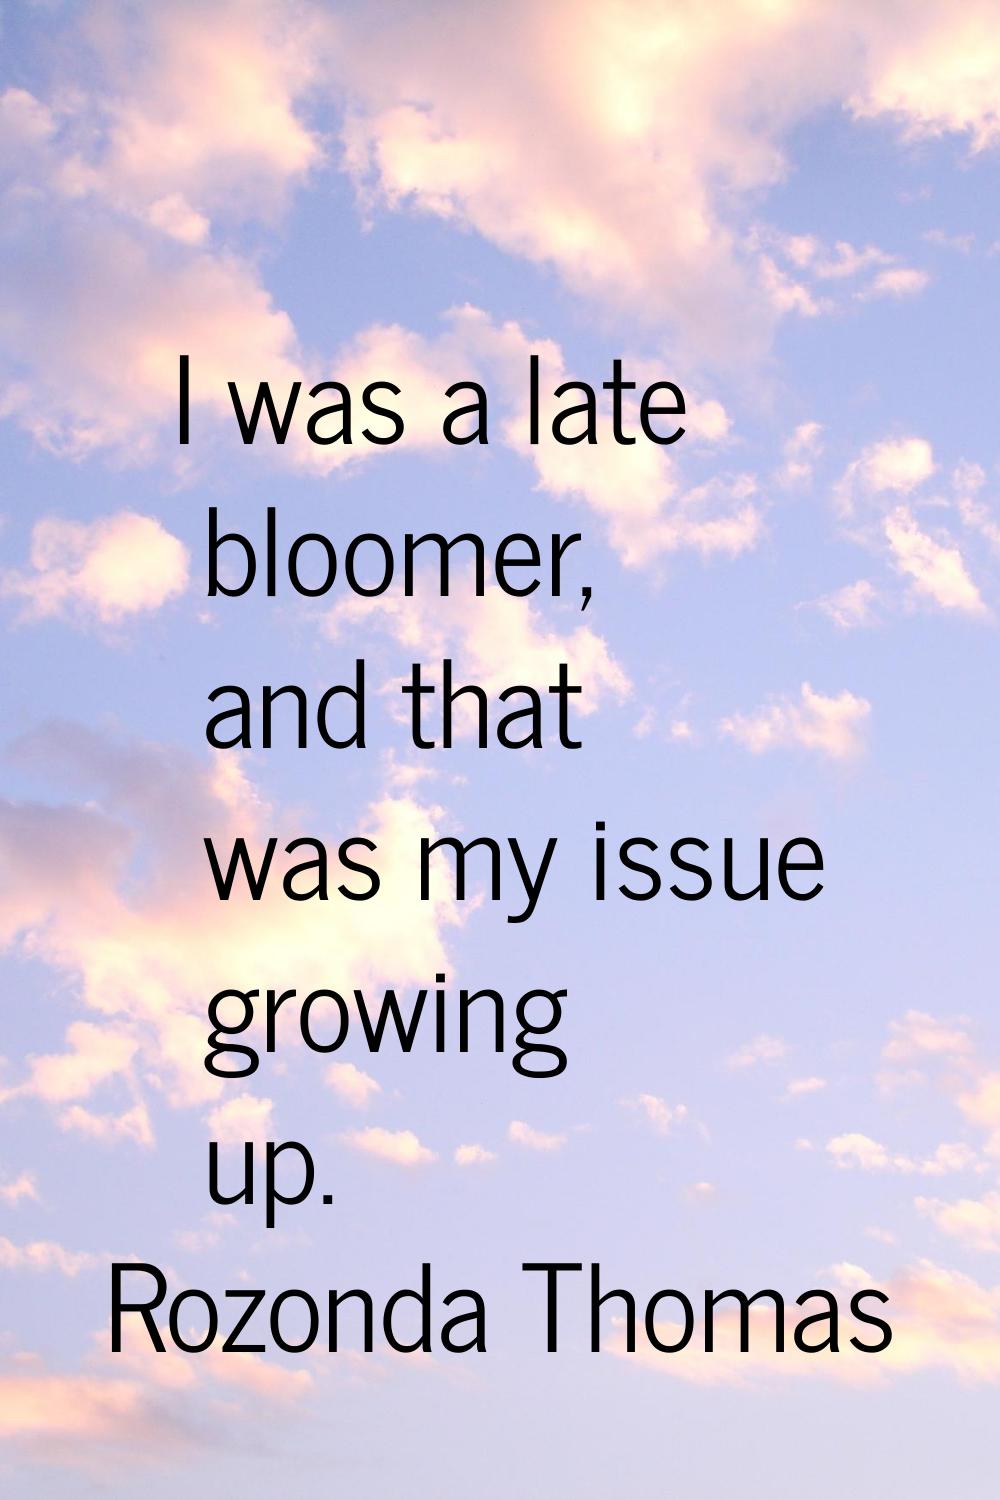 I was a late bloomer, and that was my issue growing up.